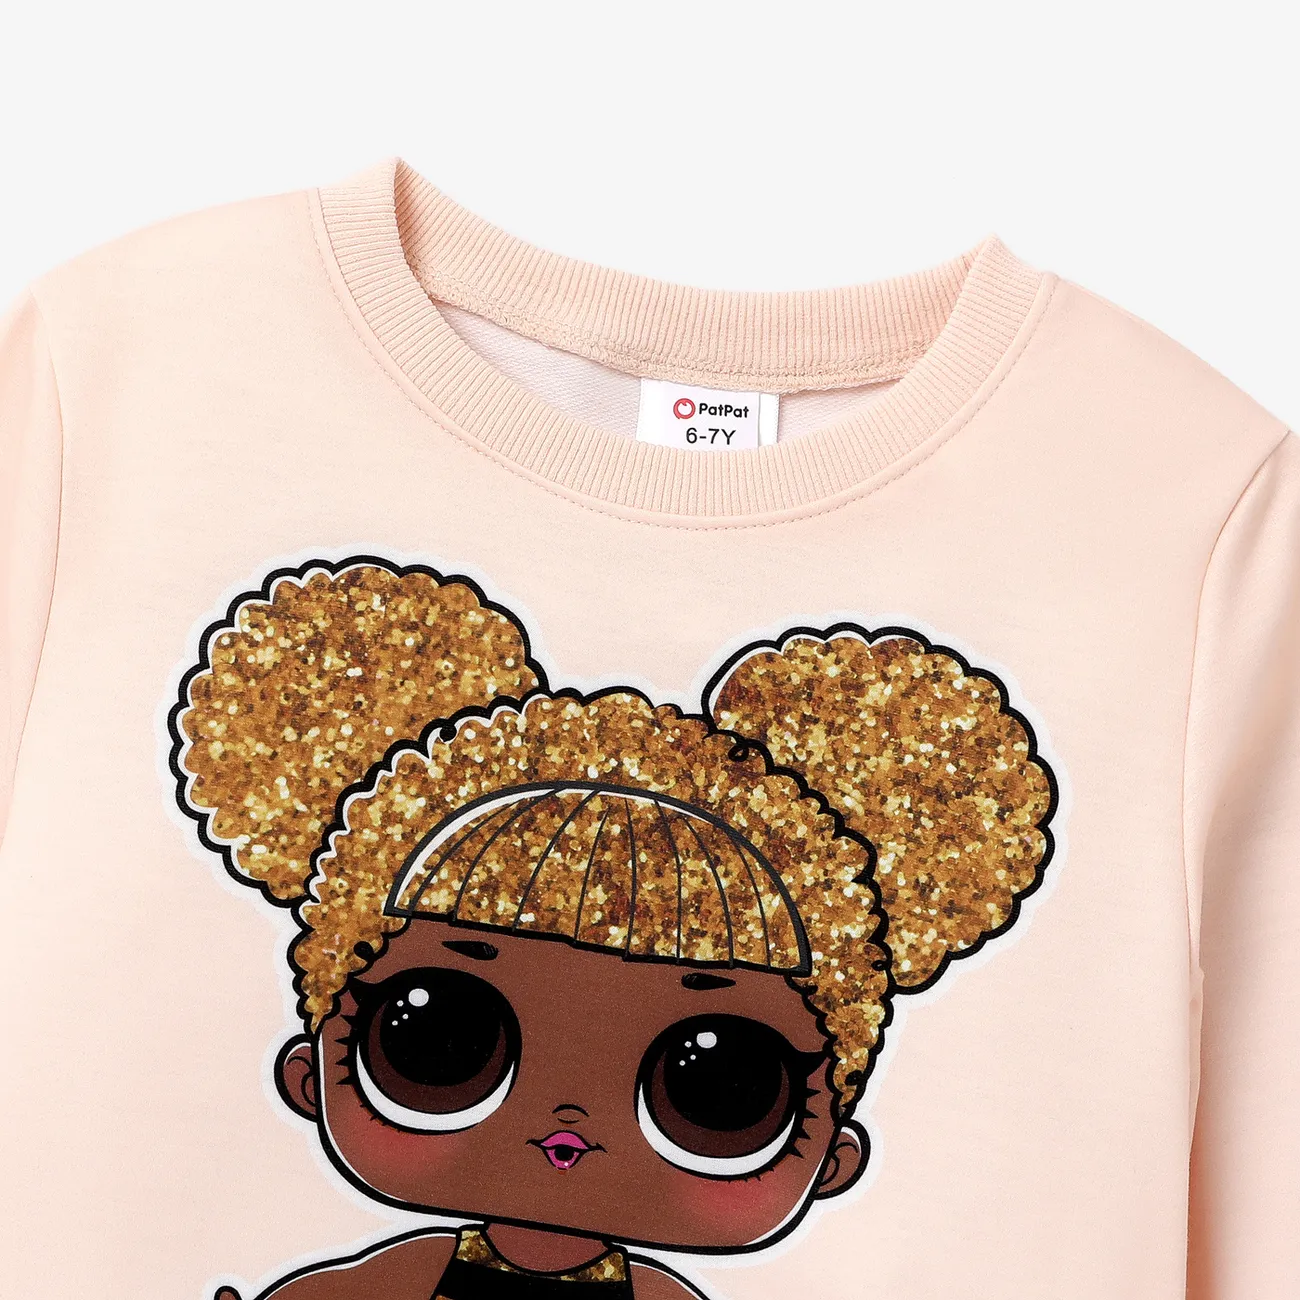 L.O.L. SURPRISE! Kid Girl Letter Characters Print Pullover Sweatshirt Apricot big image 1